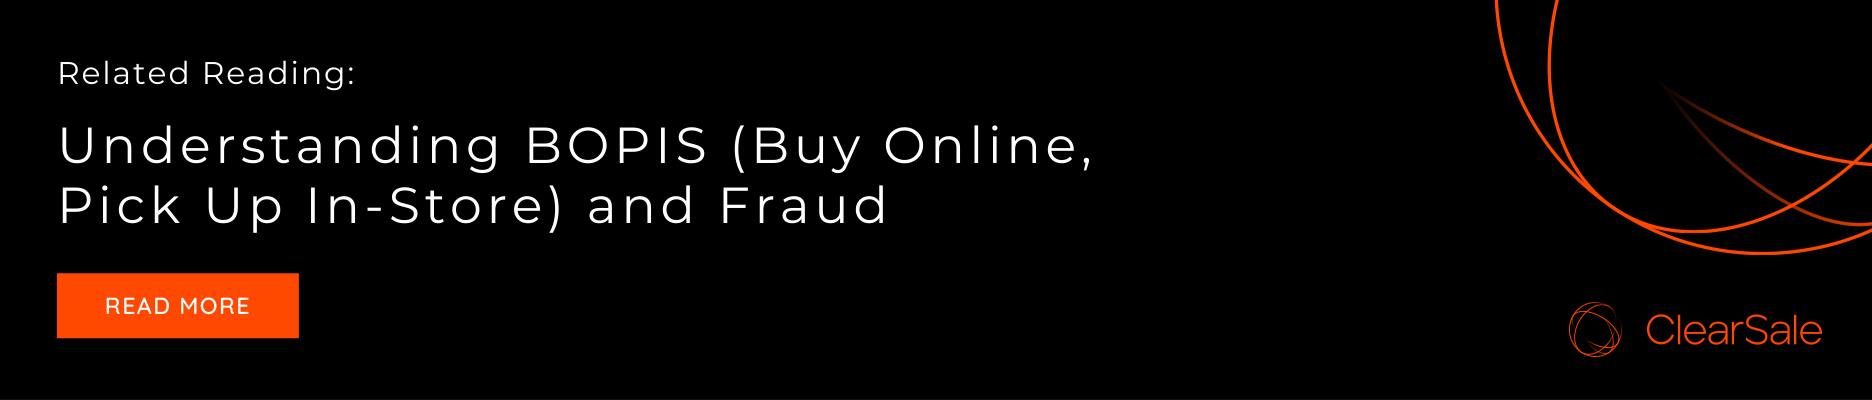 Understanding BOPIS (Buy Online, Pick Up In-Store) and Fraud